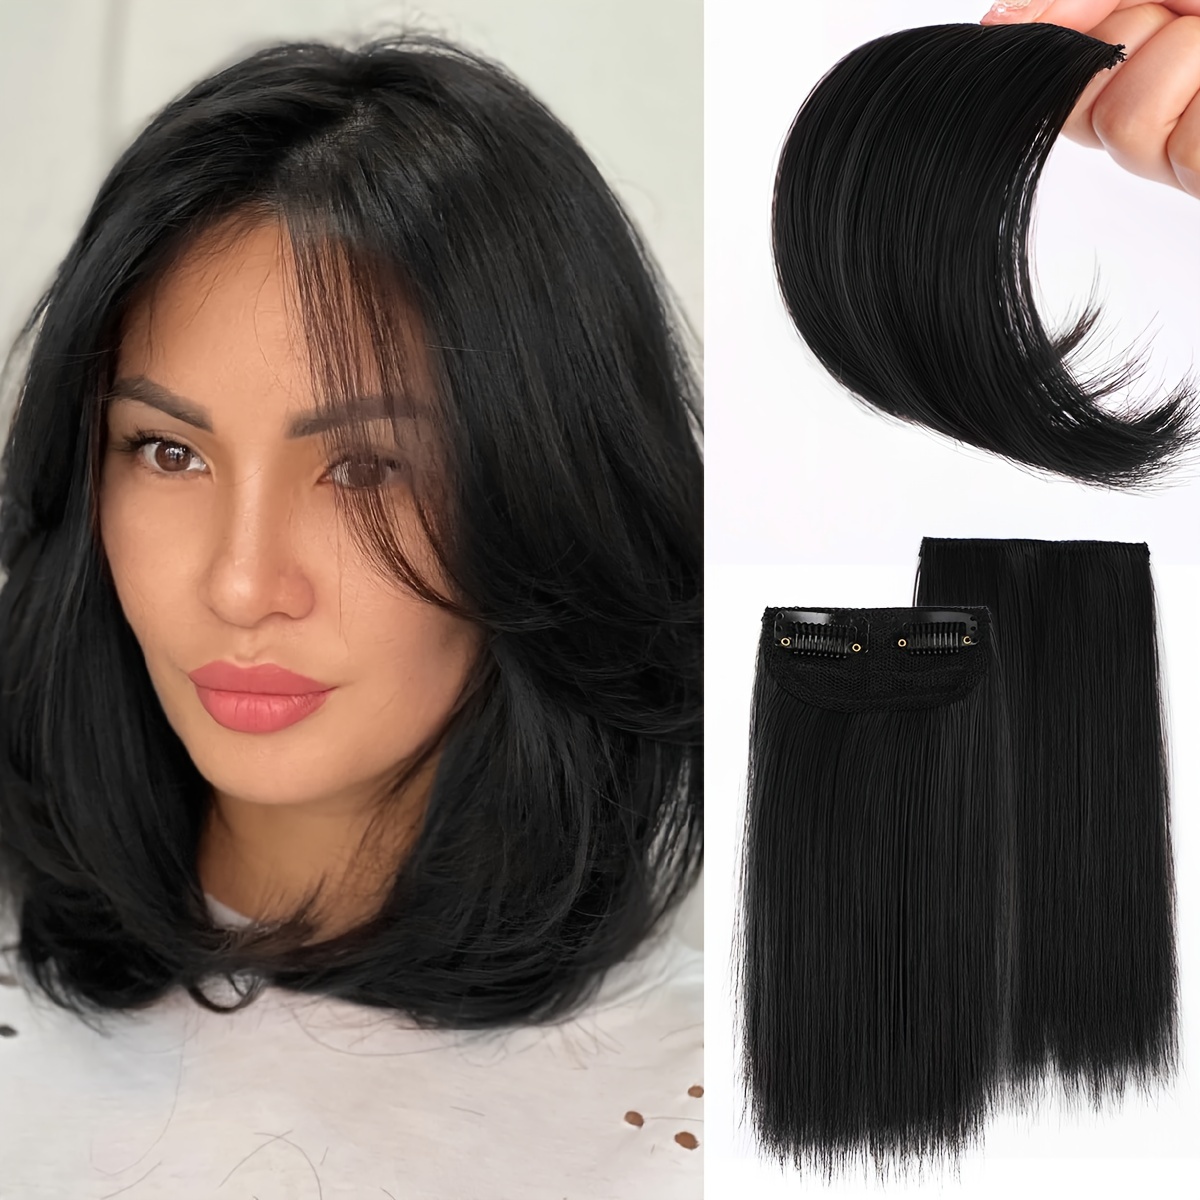 

Fnypretty 4-piece Set: Invisible Clip-in Hair Extensions For Women - Add Volume & Length, Short Straight Synthetic Hairpieces In Black & Brown (2x4" + 2x8")